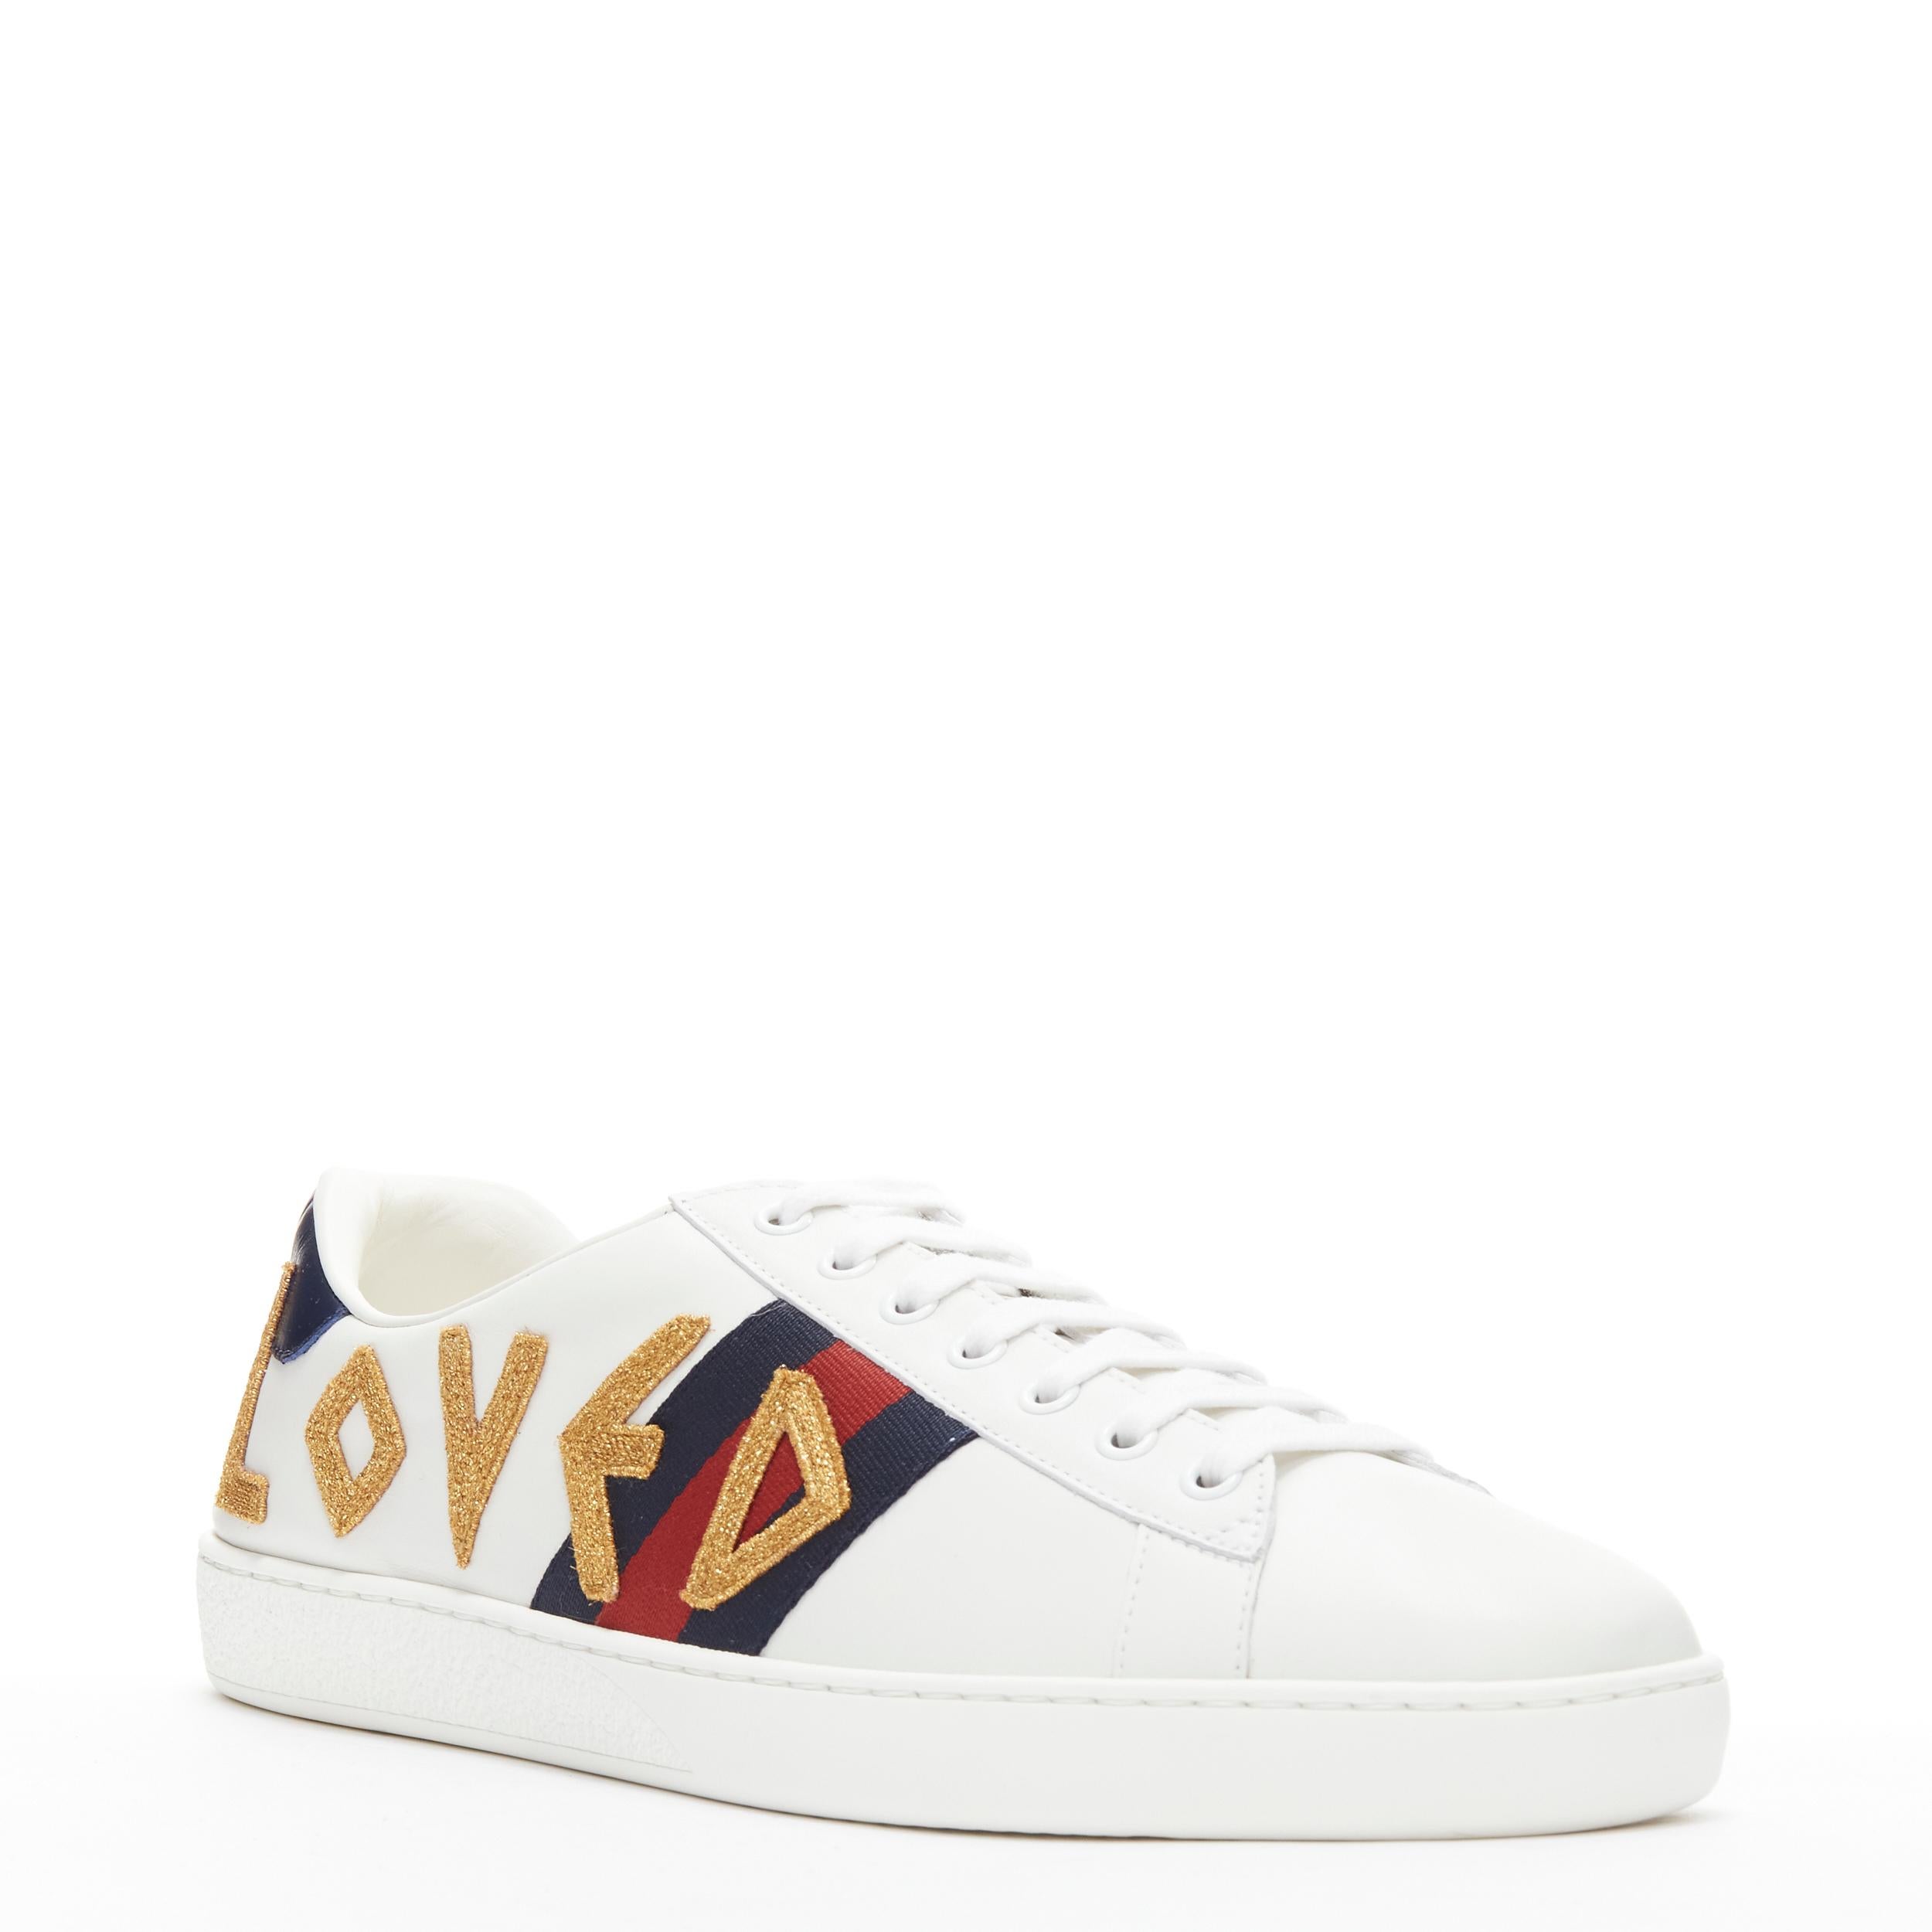 GUCCI Ace Loved gold letter patchwork white navy red web sneaker UK9 EU43
Reference: TGAS/B02019
Brand: Gucci
Designer: Alessandro Michele
Model: 497090
Material: Leather
Color: White
Pattern: Solid
Closure: Lace Up
Lining: Leather
Made in: